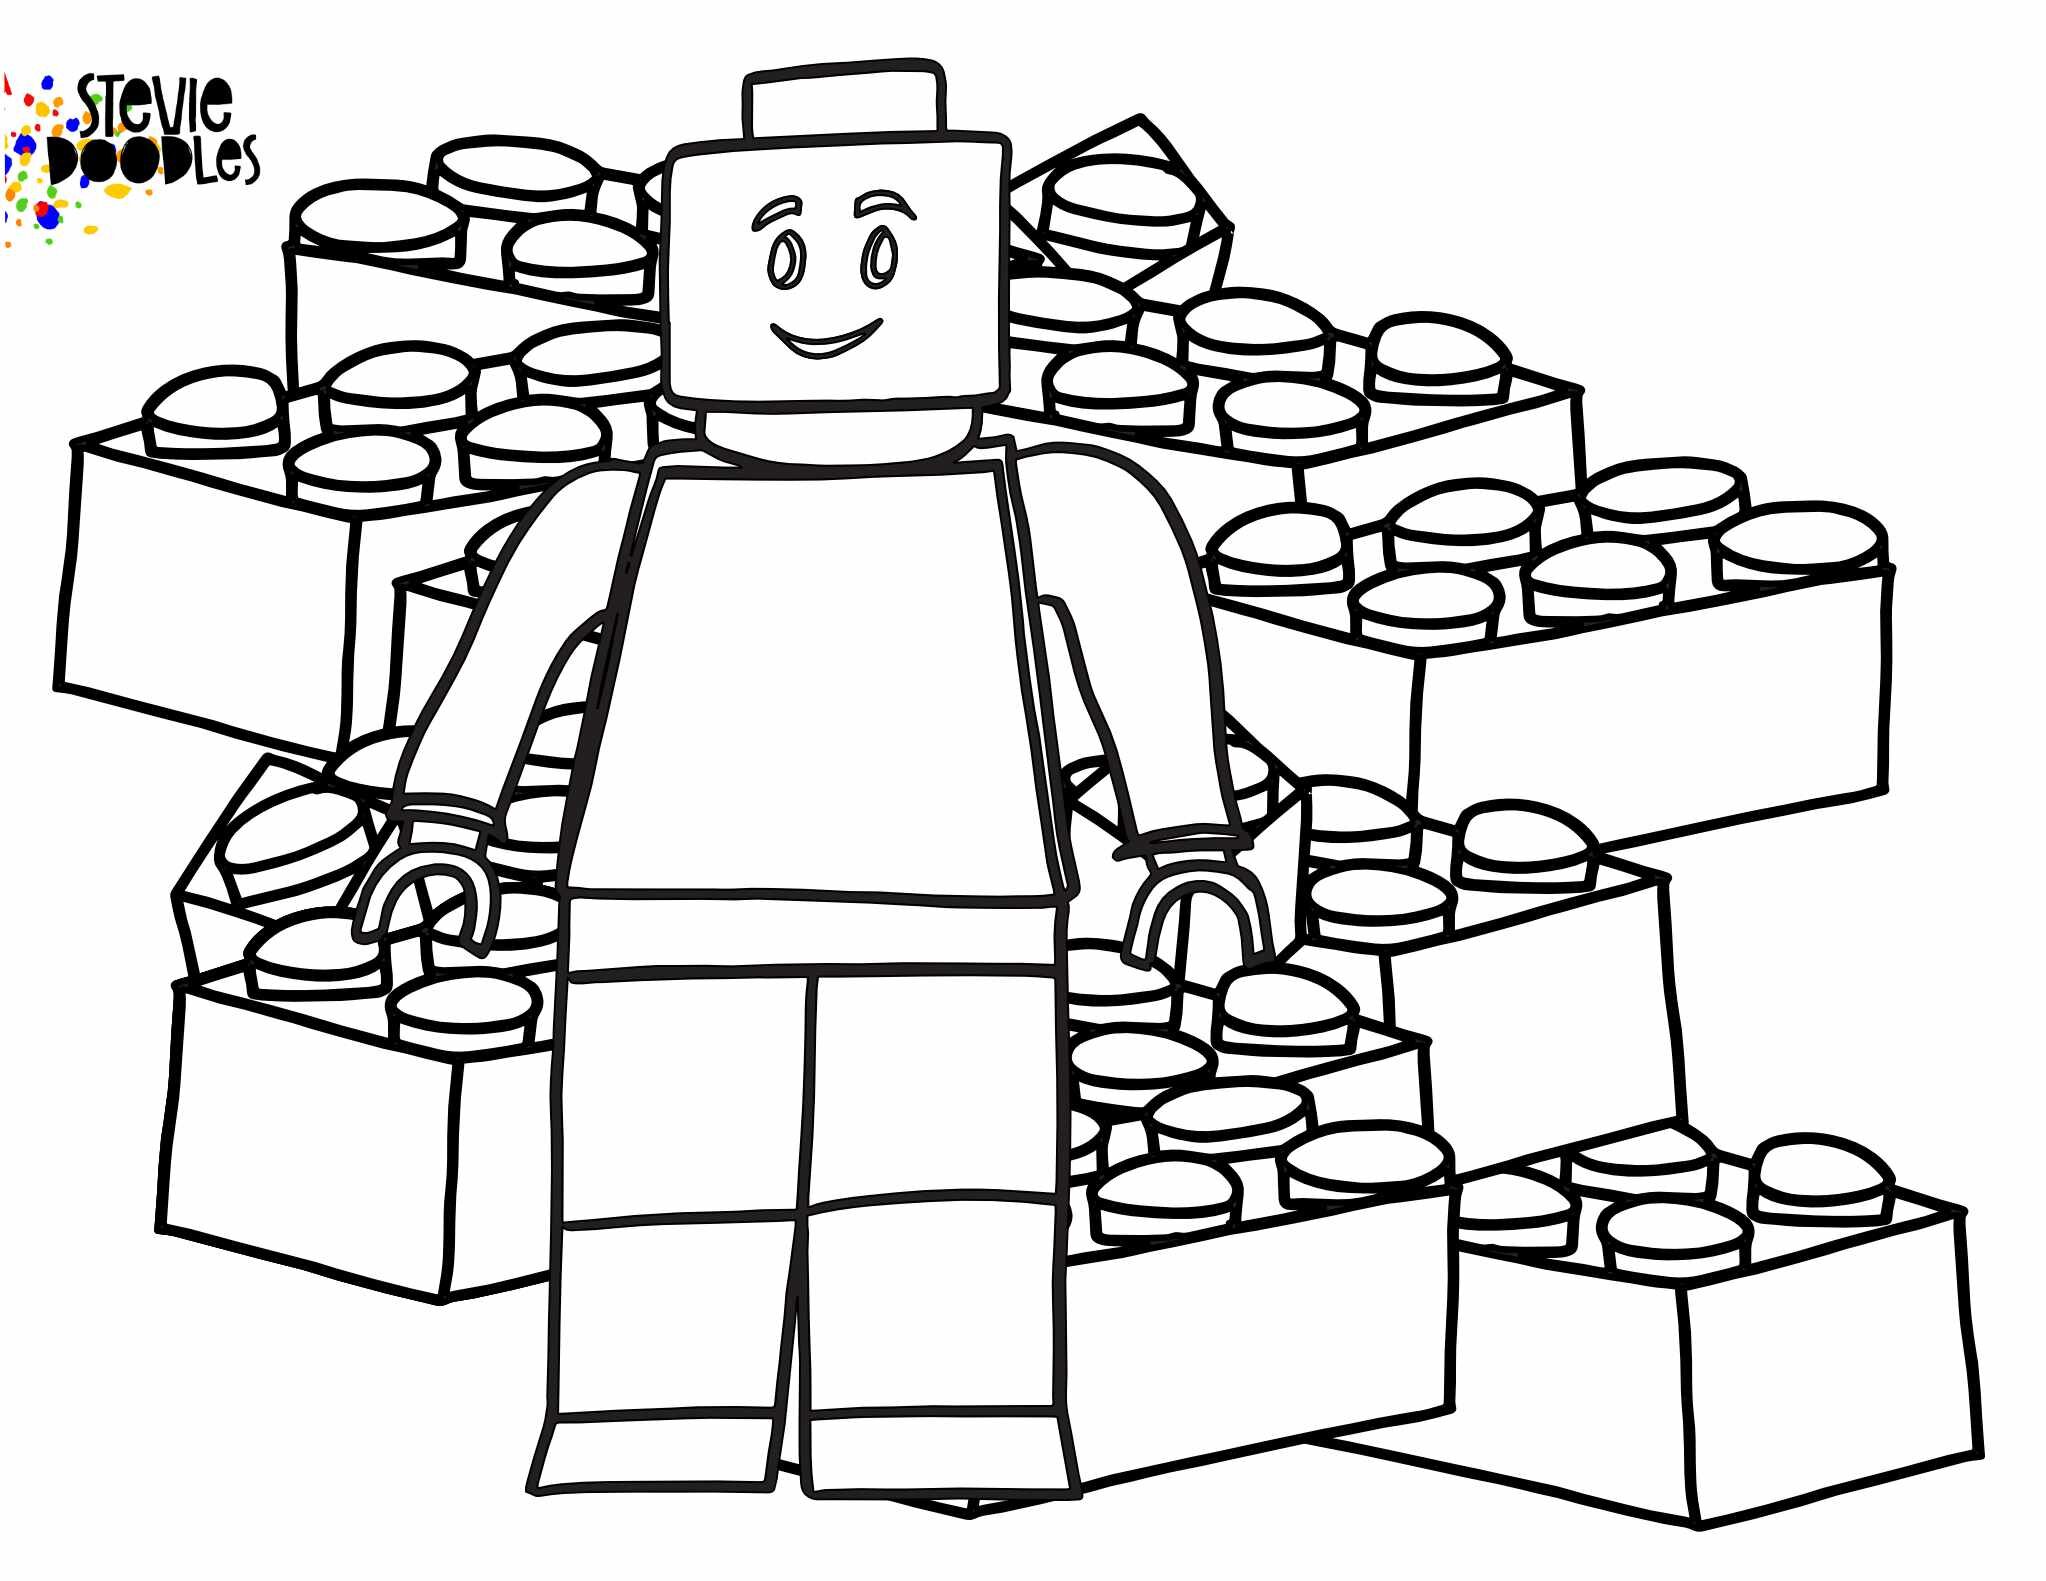 LEGO Gifted By God Coloring Pages FREE — Stevie Doodles Free ...